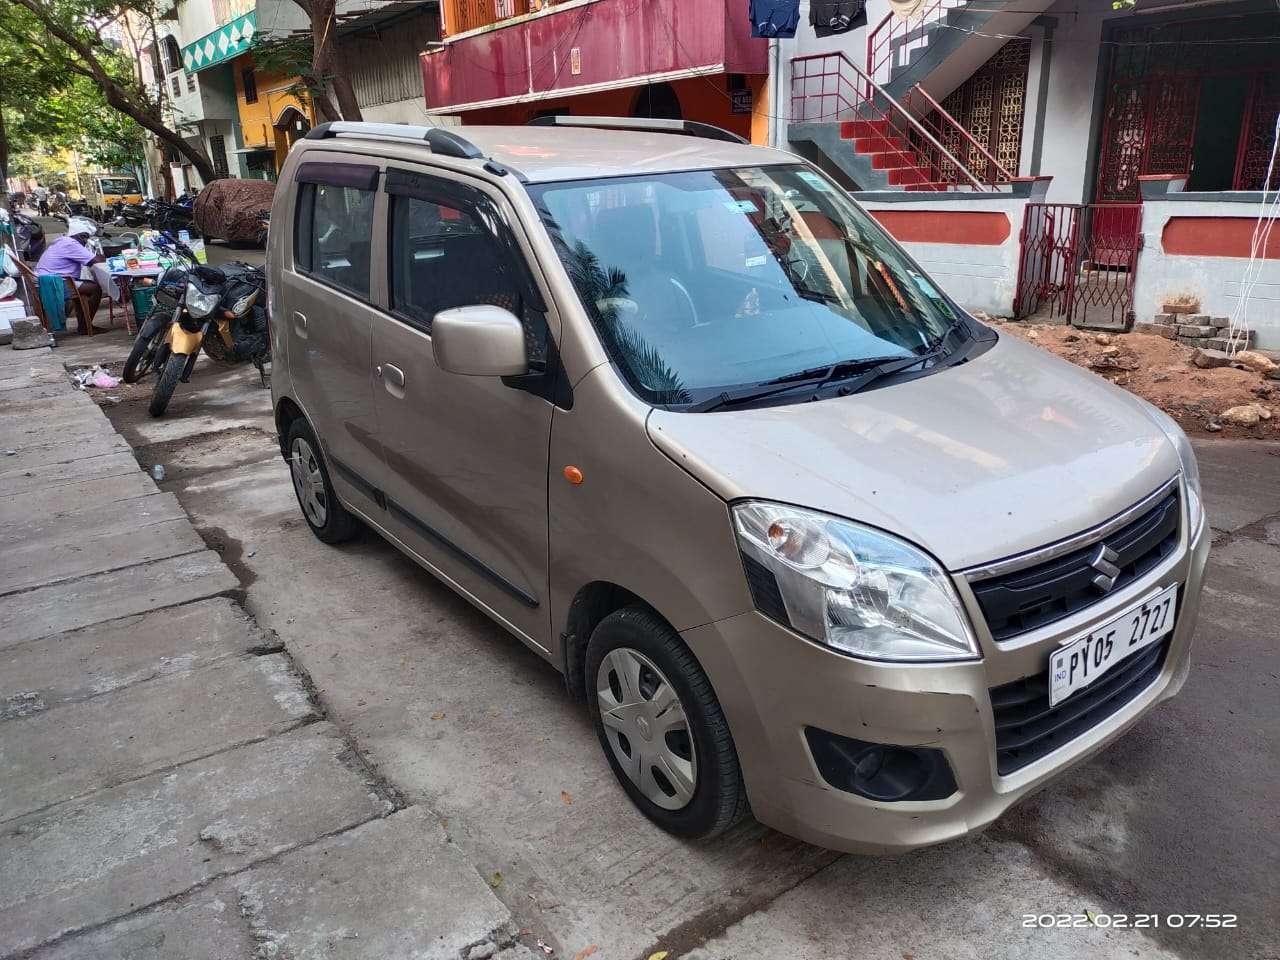 1826-for-sale-Maruthi-Suzuki-Wagon-R-1.0-Petrol-Second-Owner-2015-PY-registered-rs-365000